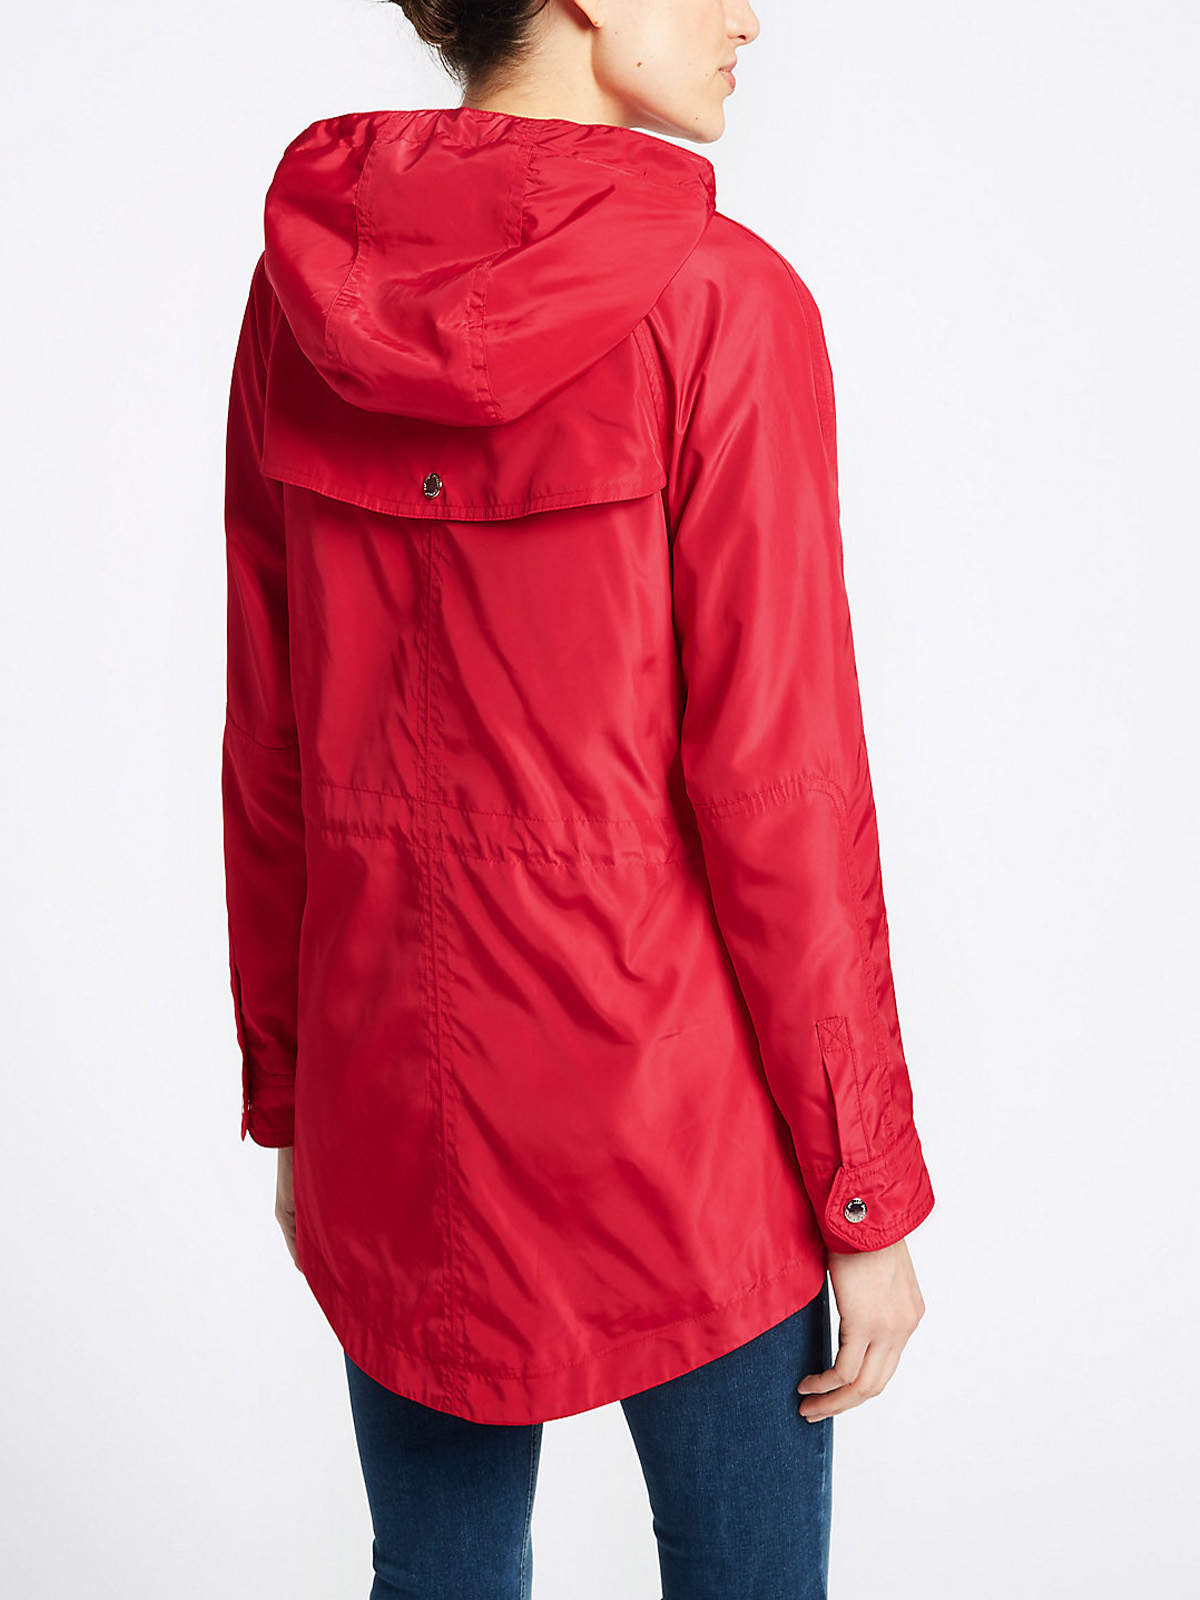 P3rUna CHERRY-RED Hooded Parka with Stormwear - Size 8 to 20